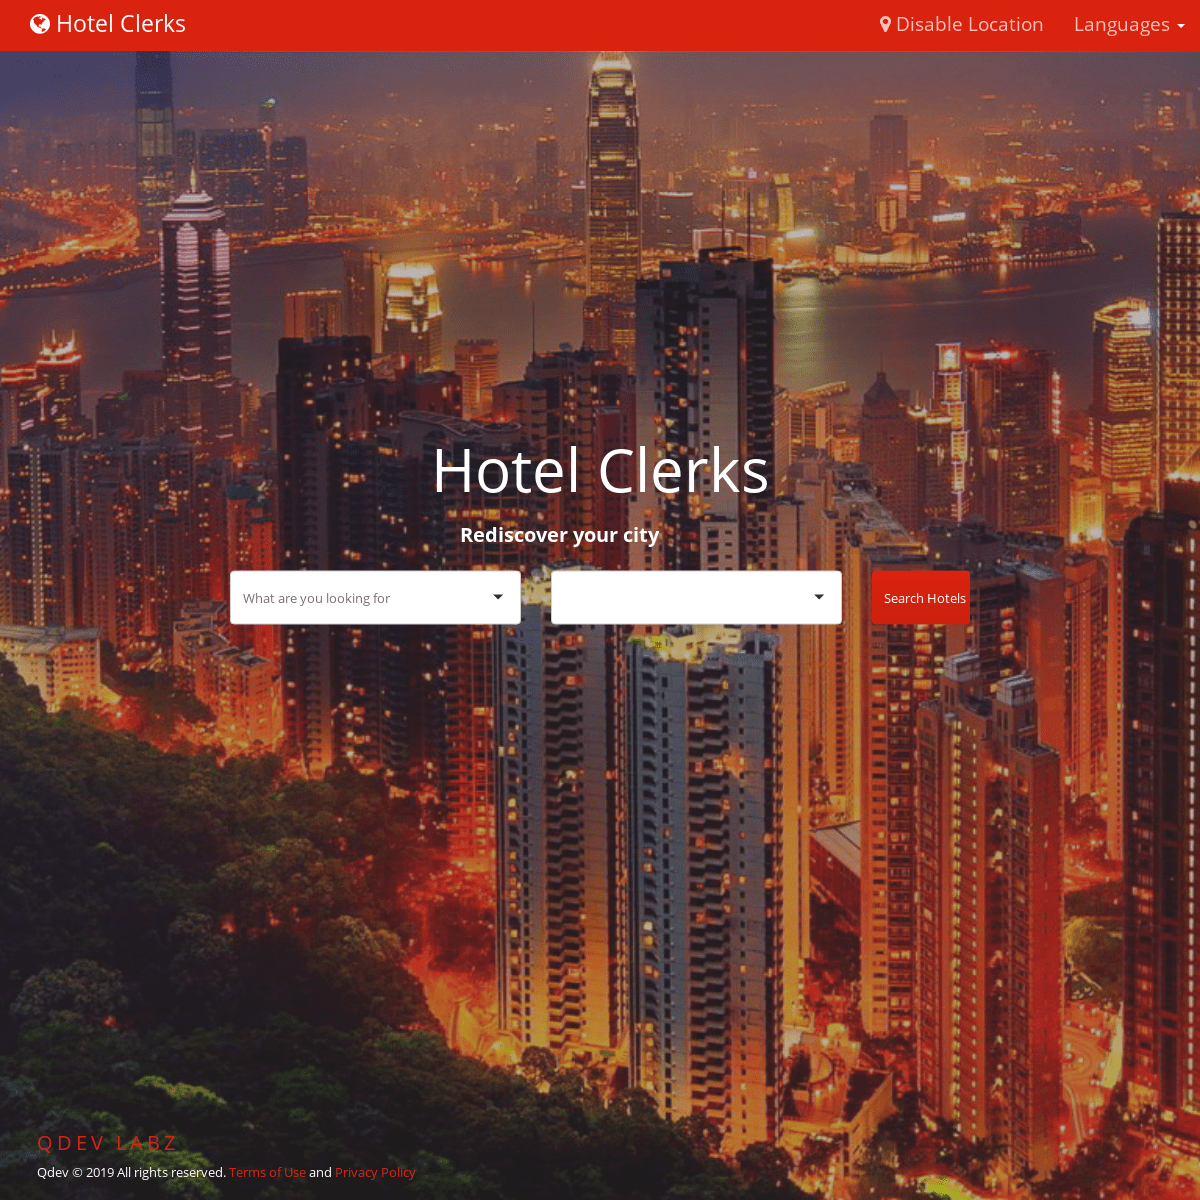 Hotel Clerks, Find hotels, places and things to do in your favorite places